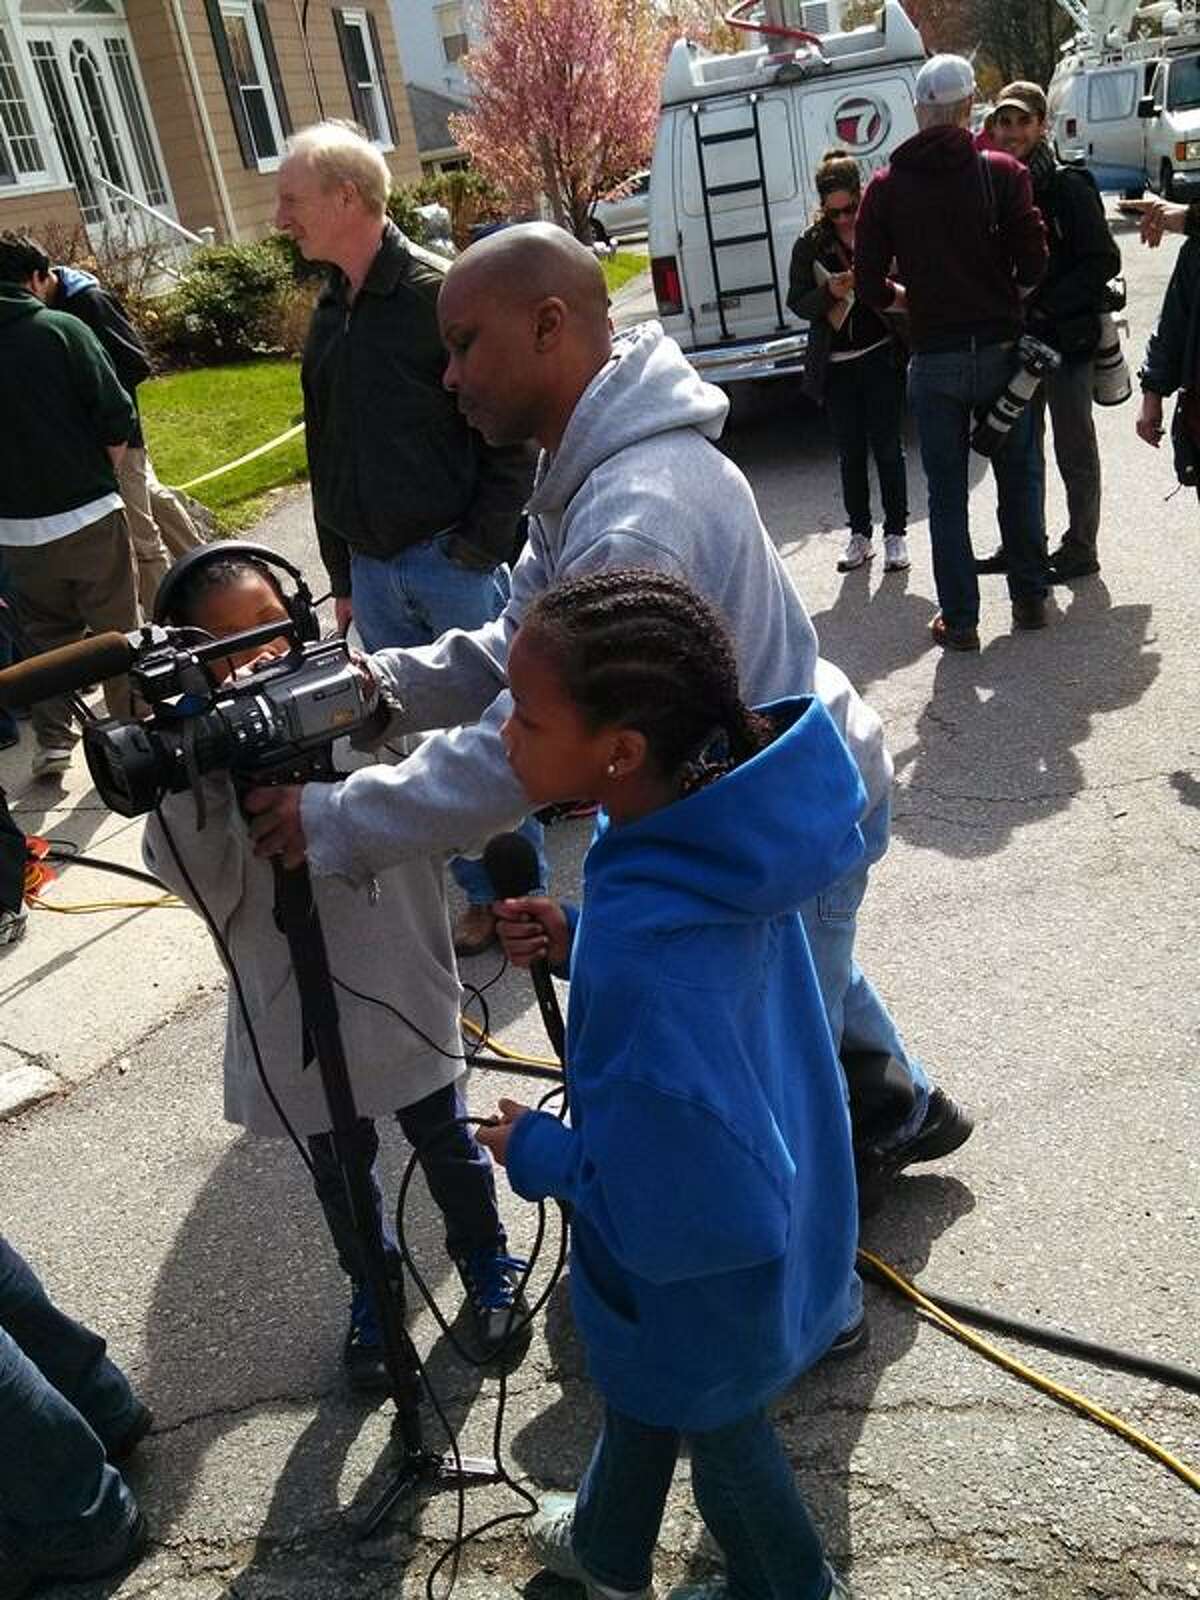 On Saturday, Robert Broadway of Roxbury, Mass. brought his daughters Helena, 9, and Haniyah, 10 to the scene where a Boston Marathon suspect was captured less than 24 hours before. He said by letting the girls ask questions and take pictures they can learn more about what happened. Photo by Jenn Smith